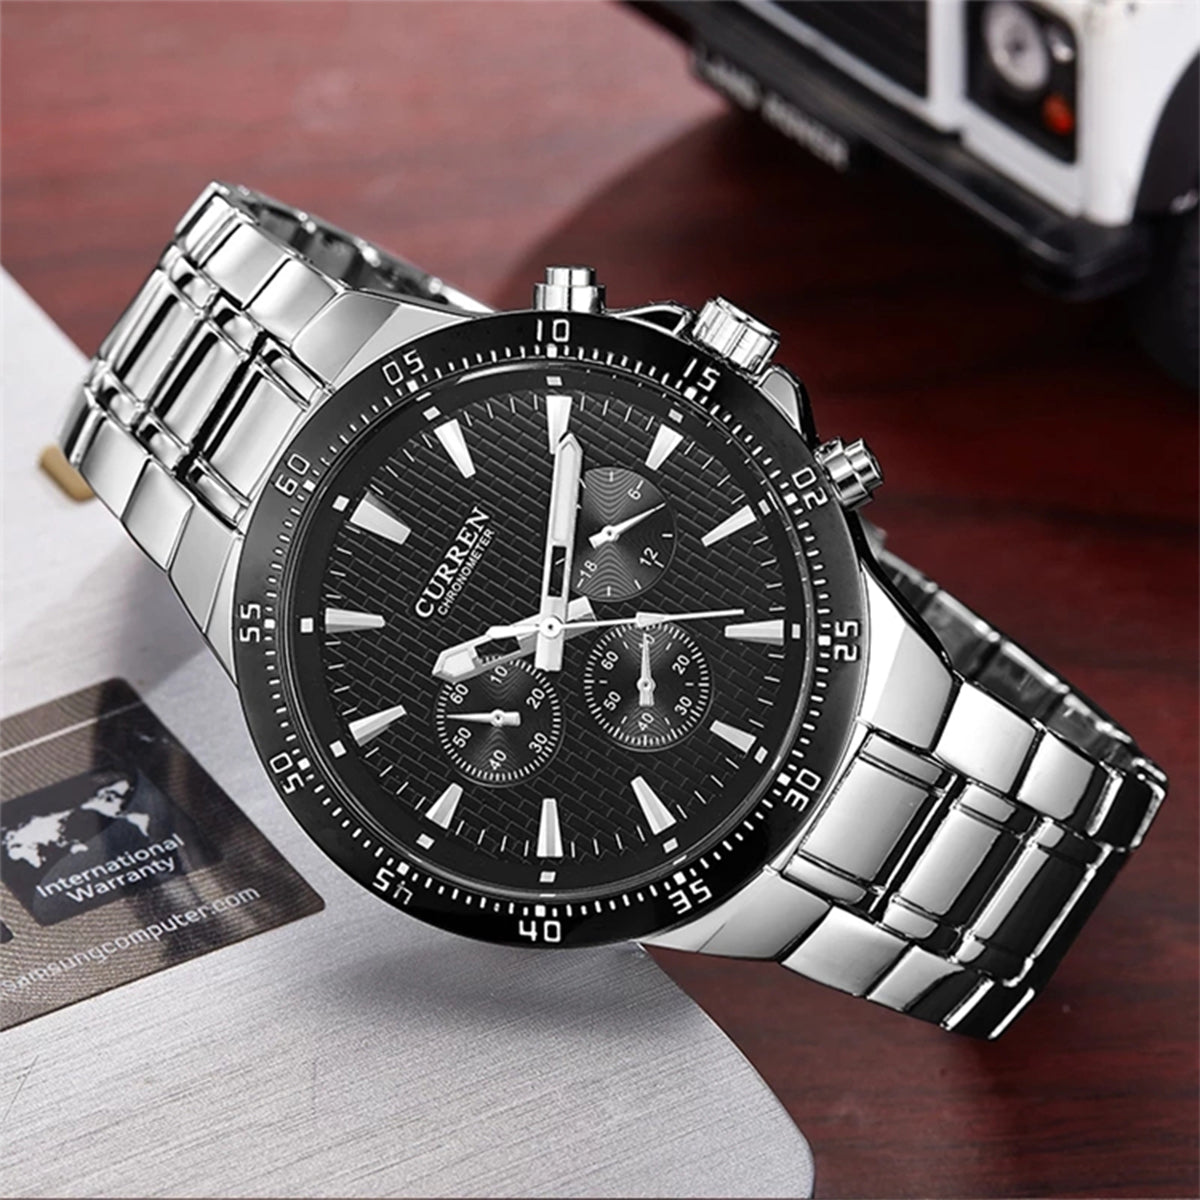 CURREN Original Brand Stainless Steel Band Wrist Watch For Men With Brand (Box & Bag)-8063